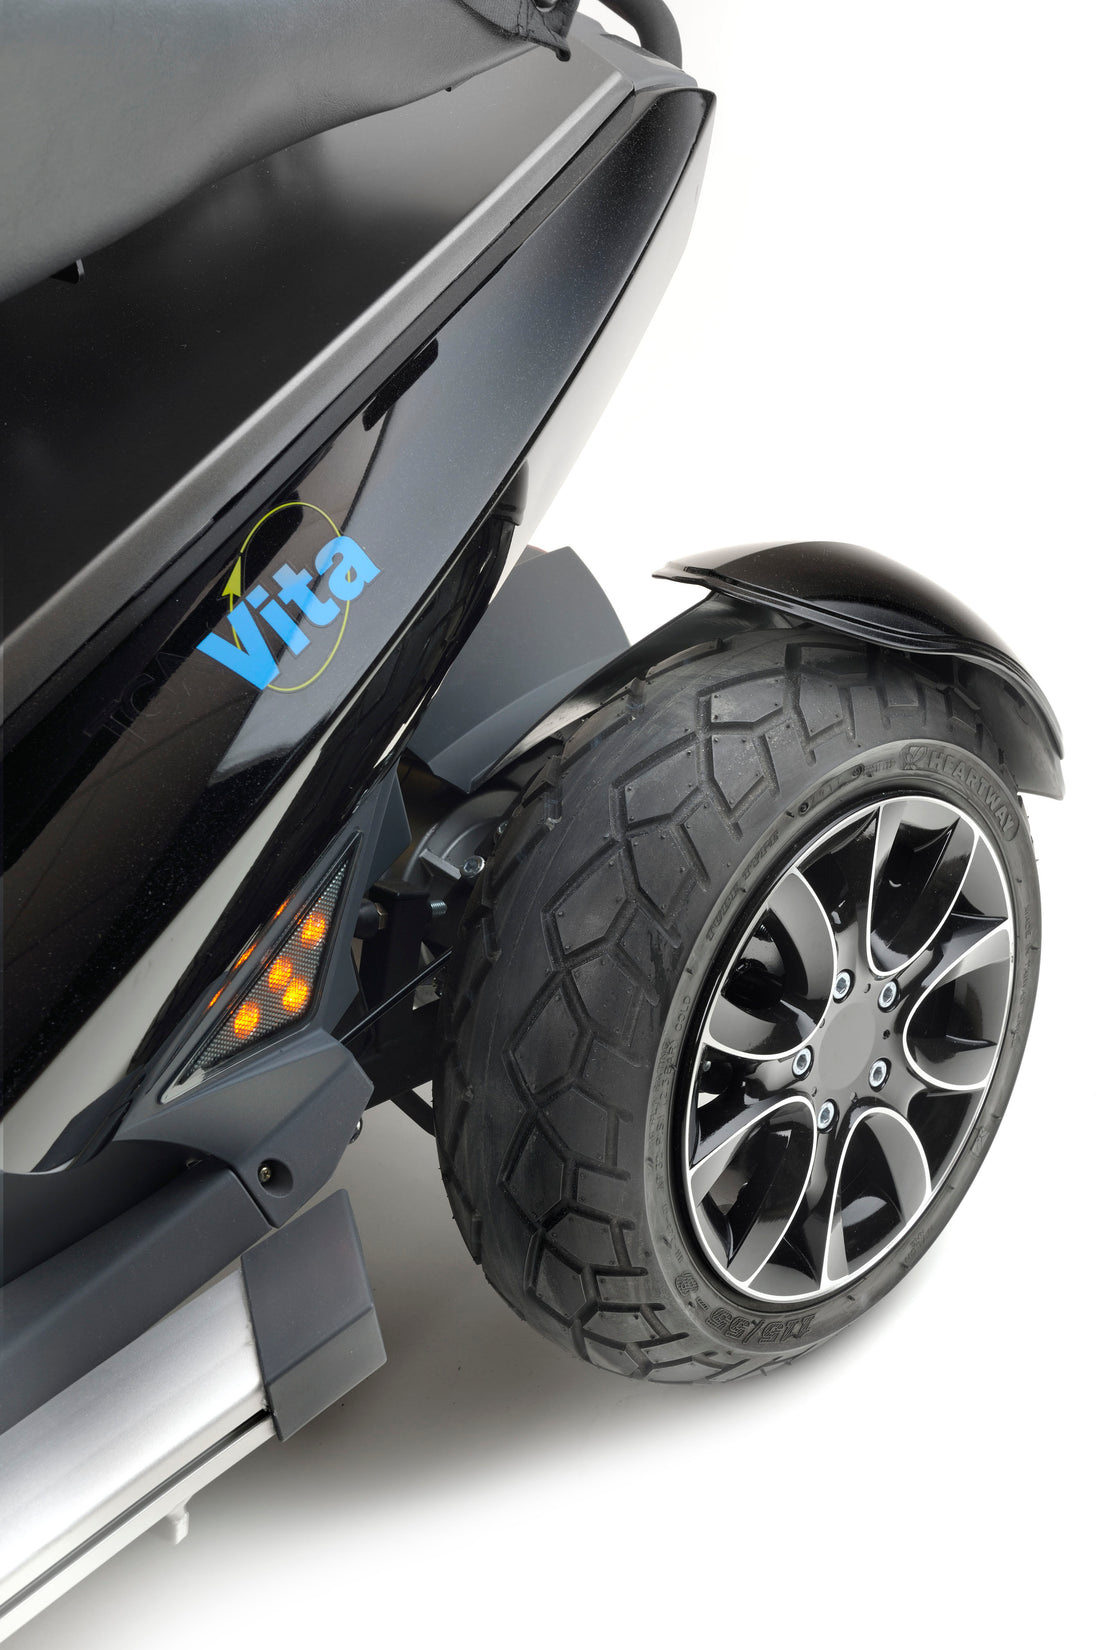 Larger 14&quot; rear alloy wheels with a design unique to the Vita Sport